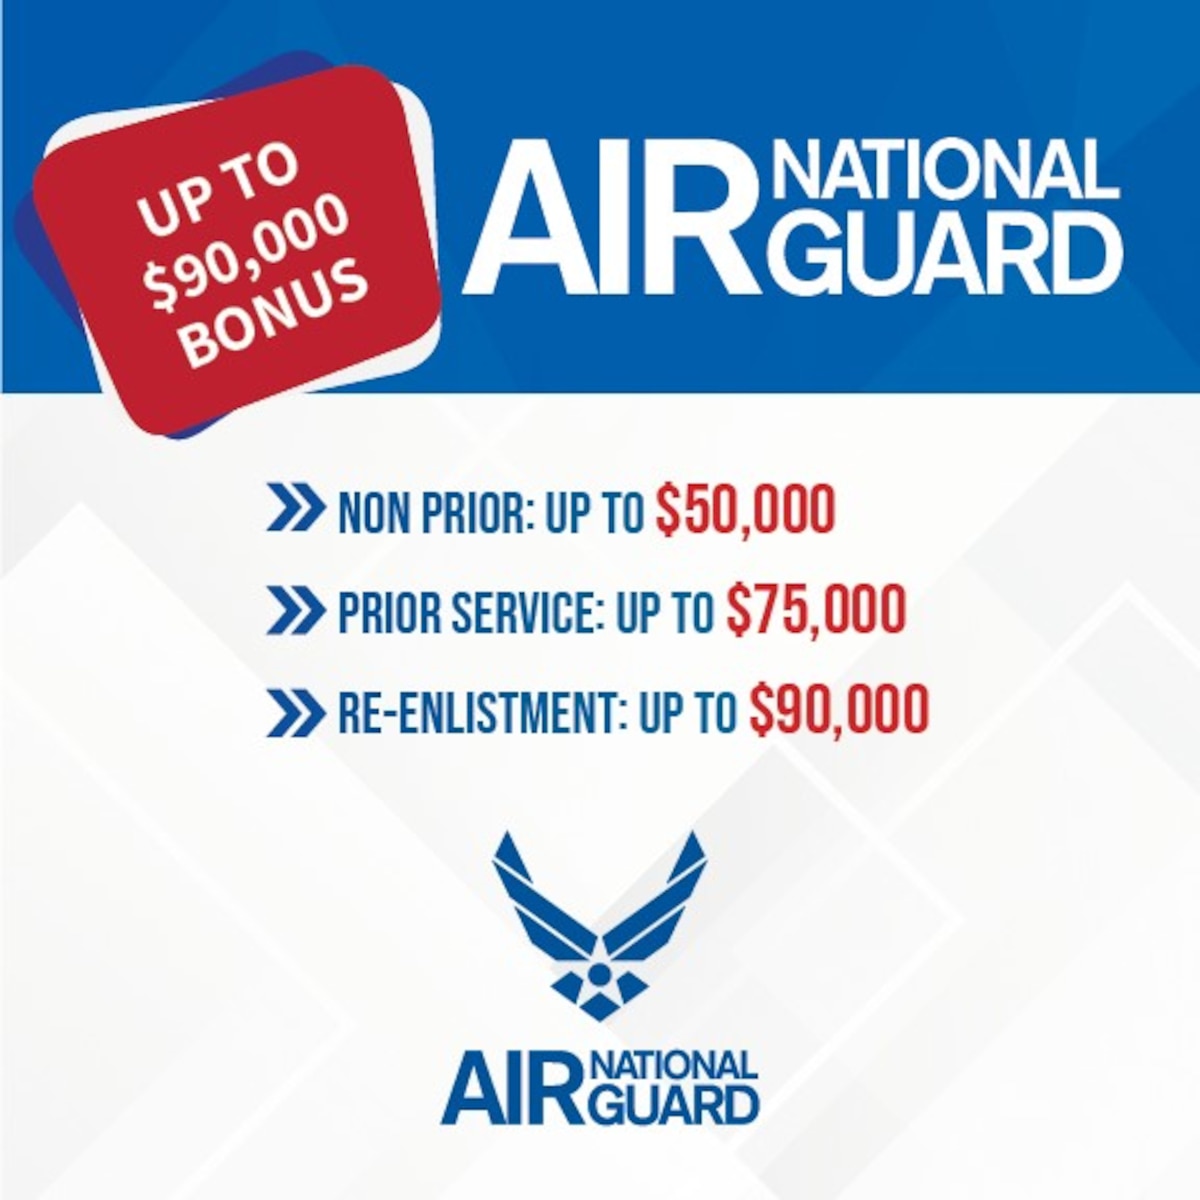 The Air National Guard (ANG) launched a new bonus program designed to attract and retain personnel in critical specialties. The initiative offers significant financial rewards, with bonuses of up to $90,000 for eligible members, depending on their Air Force Specialty Codes (AFSCs). (U.S. Air National Guard graphic by Master Sgt. Devin Doskey)